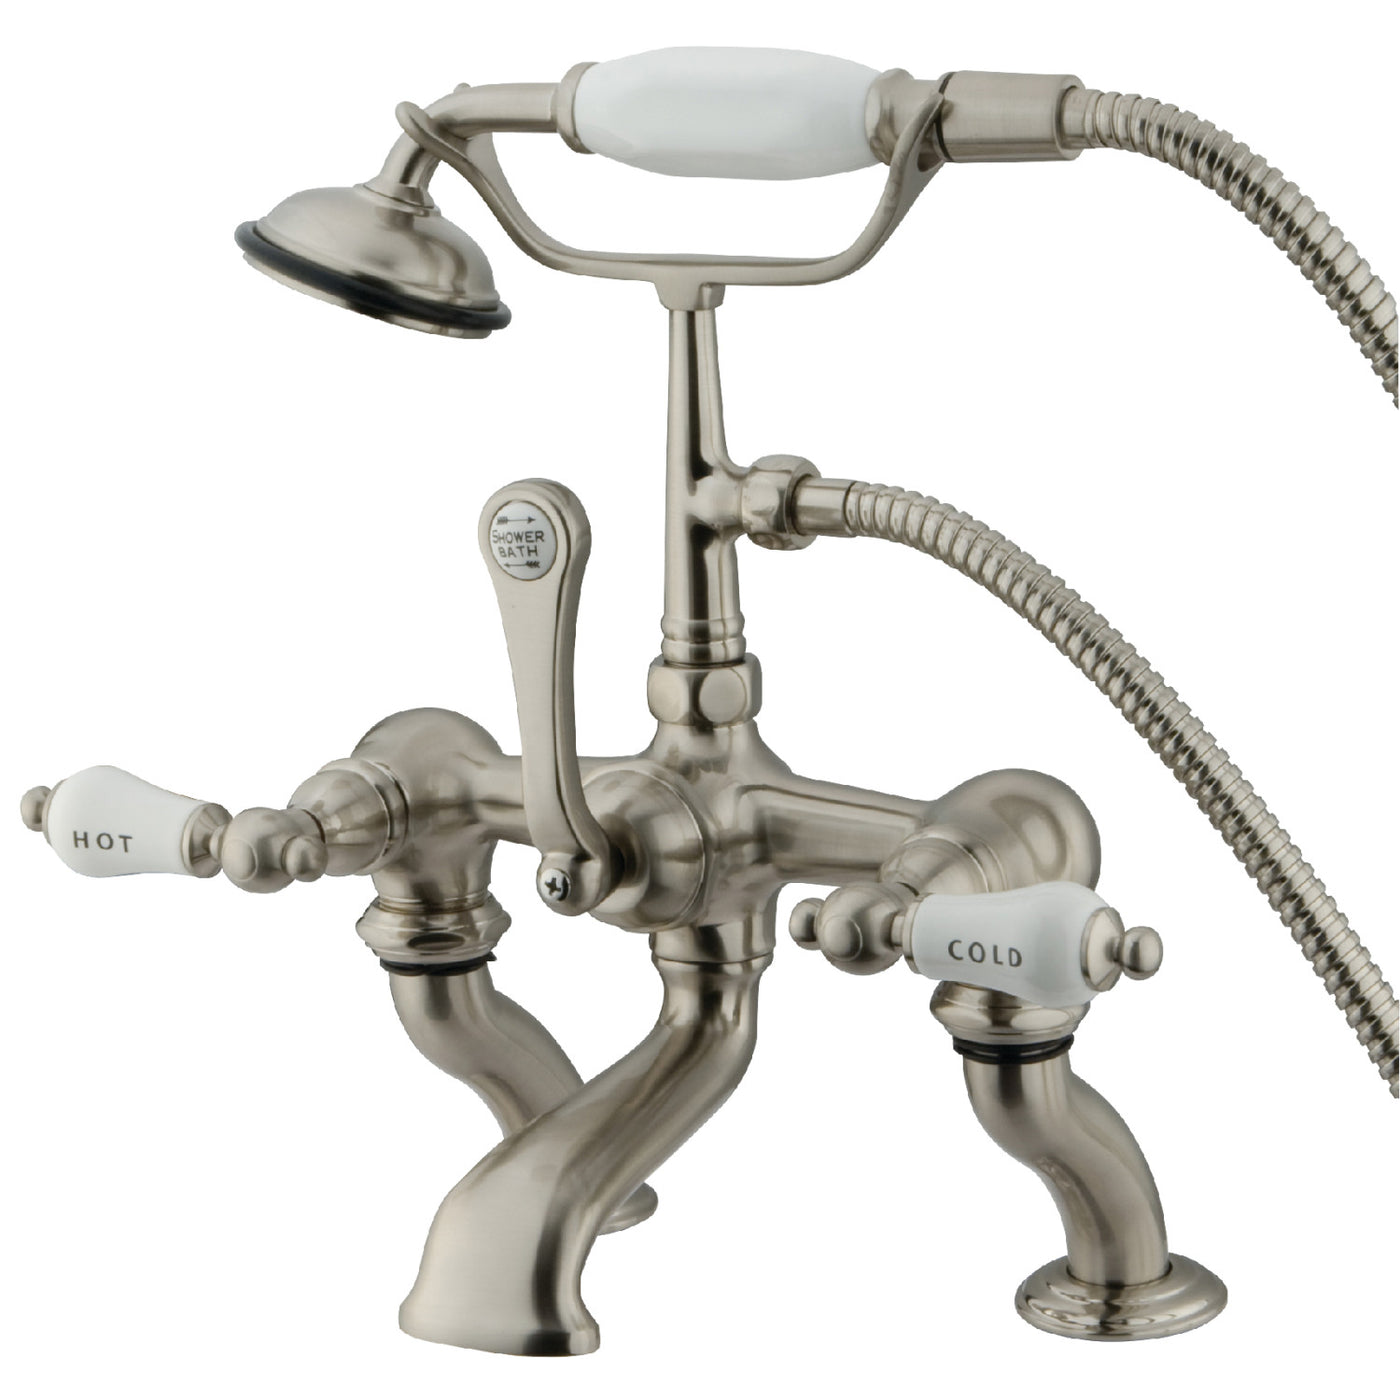 Elements of Design DT4098CL 7-Inch Deck Mount Tub Faucet with Hand Shower, Brushed Nickel